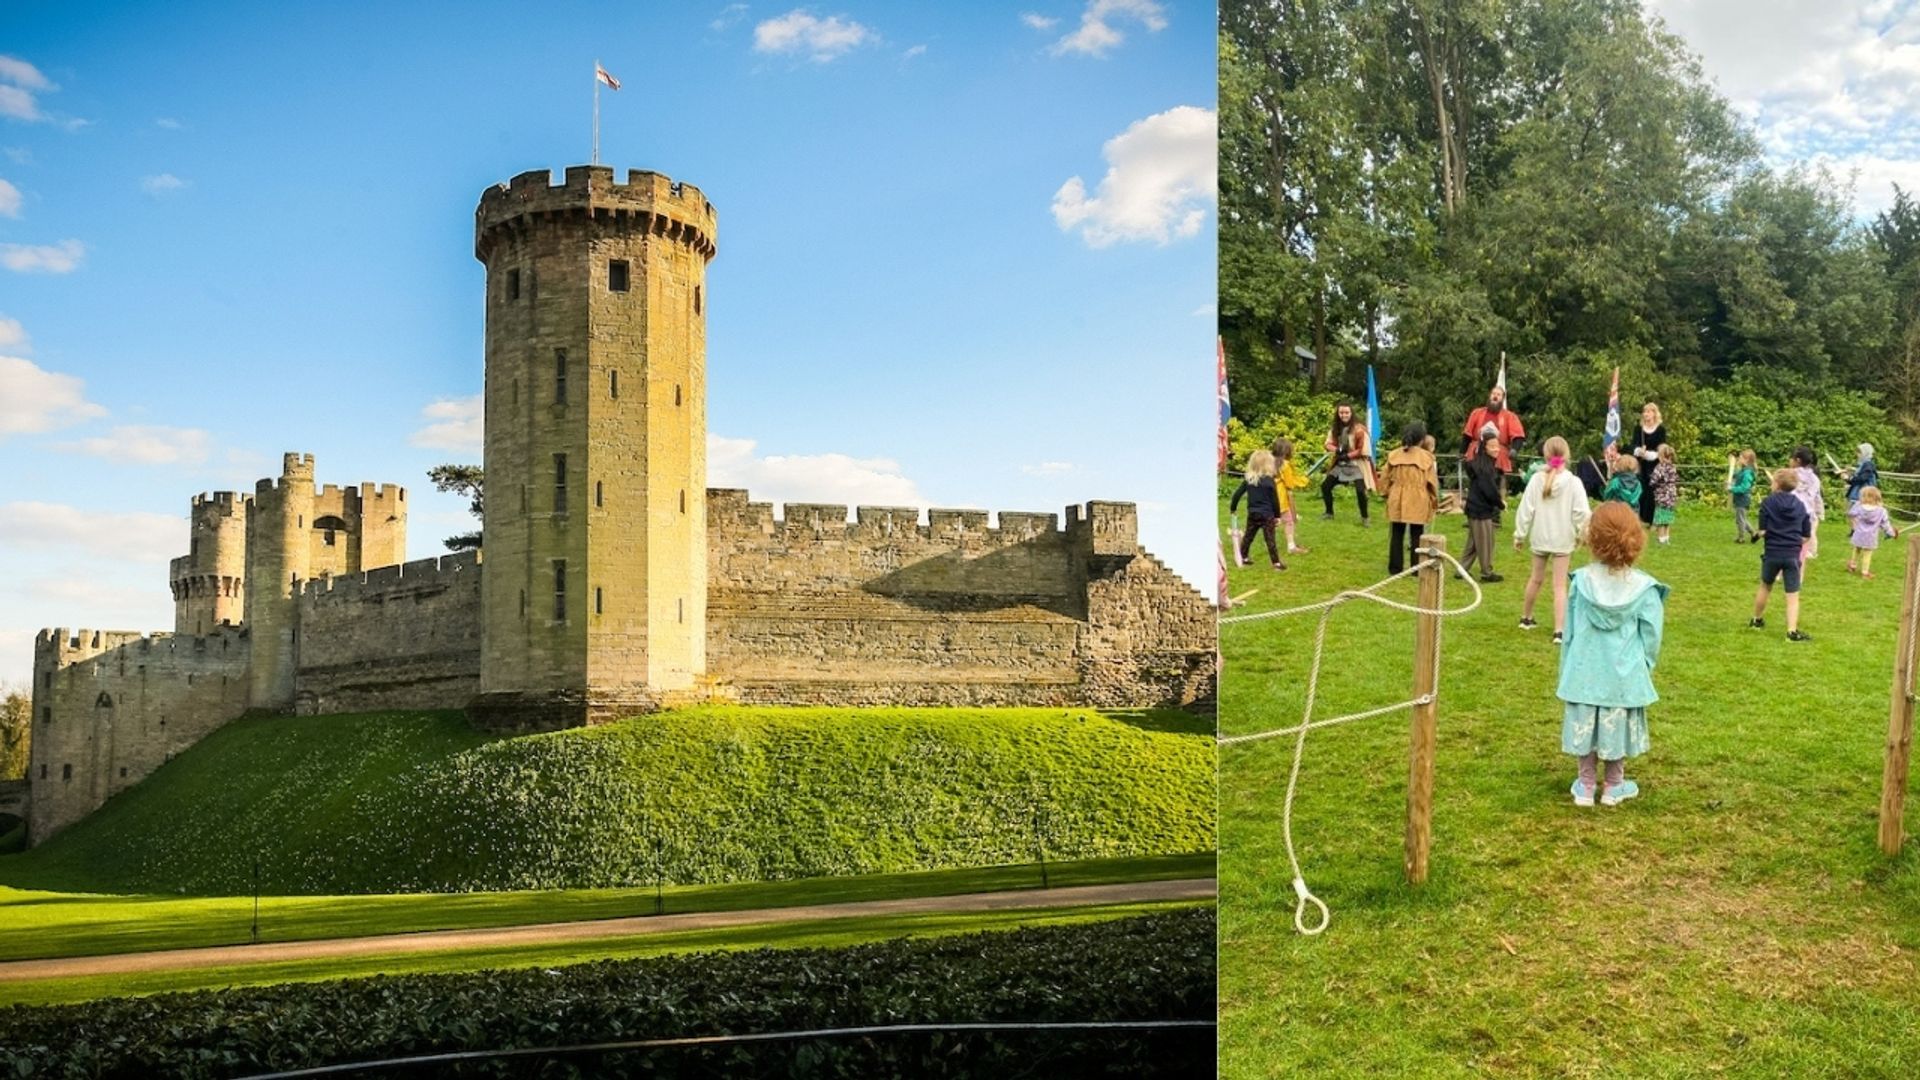 The east front of Warwick Castle in the sun on the left and children in a field on the right